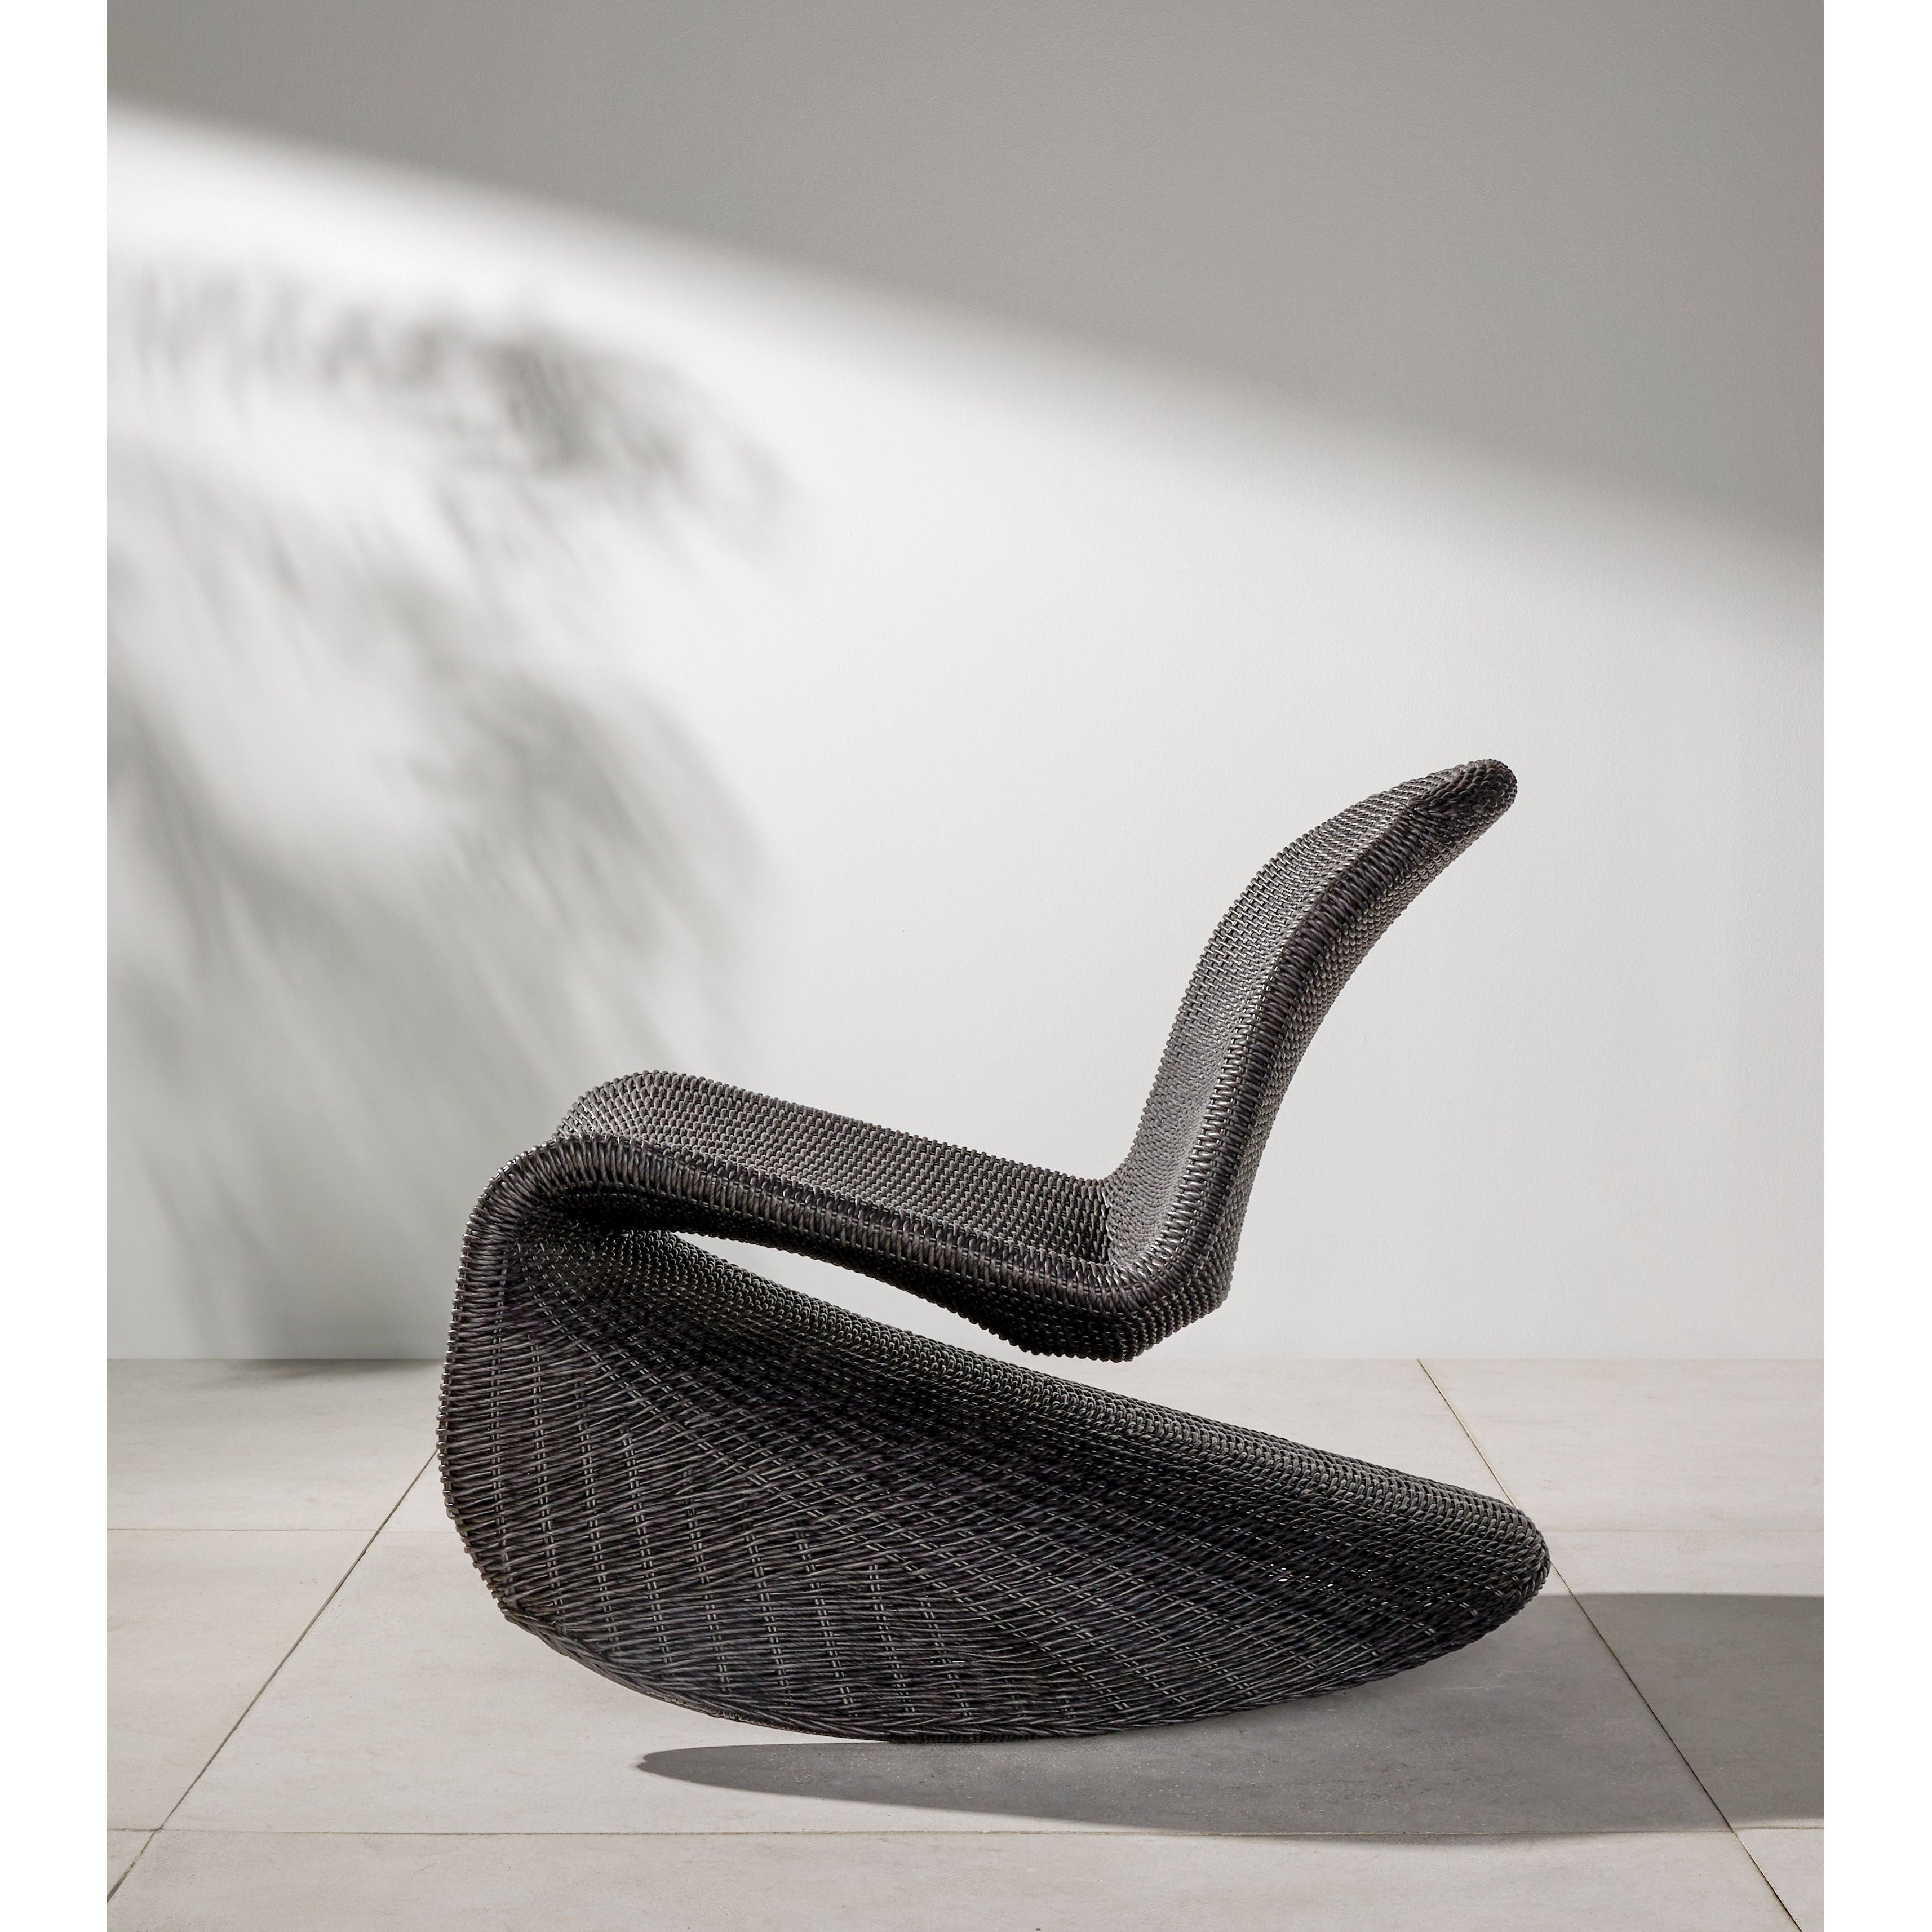 Based off a vintage shape, all-weather wicker seating brings dramatic curves to this statement-making rocking chair. Cover or store indoors during inclement weather and when not in use. Amethyst Home provides interior design, new construction, custom furniture, and area rugs in the Houston metro area.